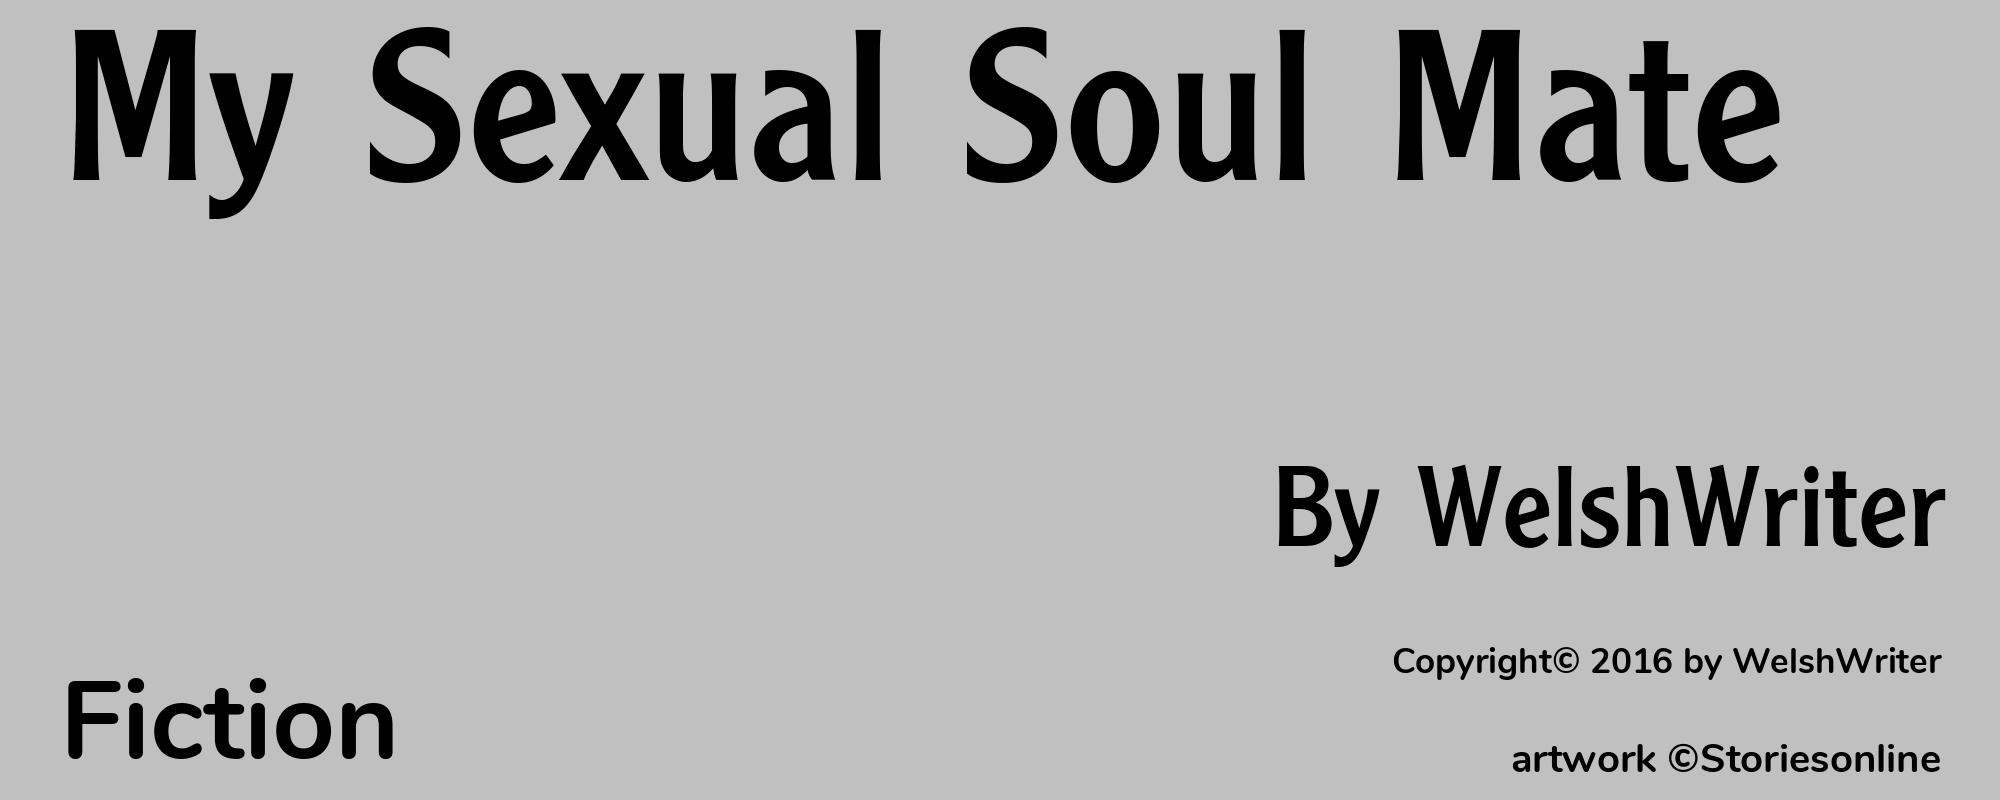 My Sexual Soul Mate - Cover